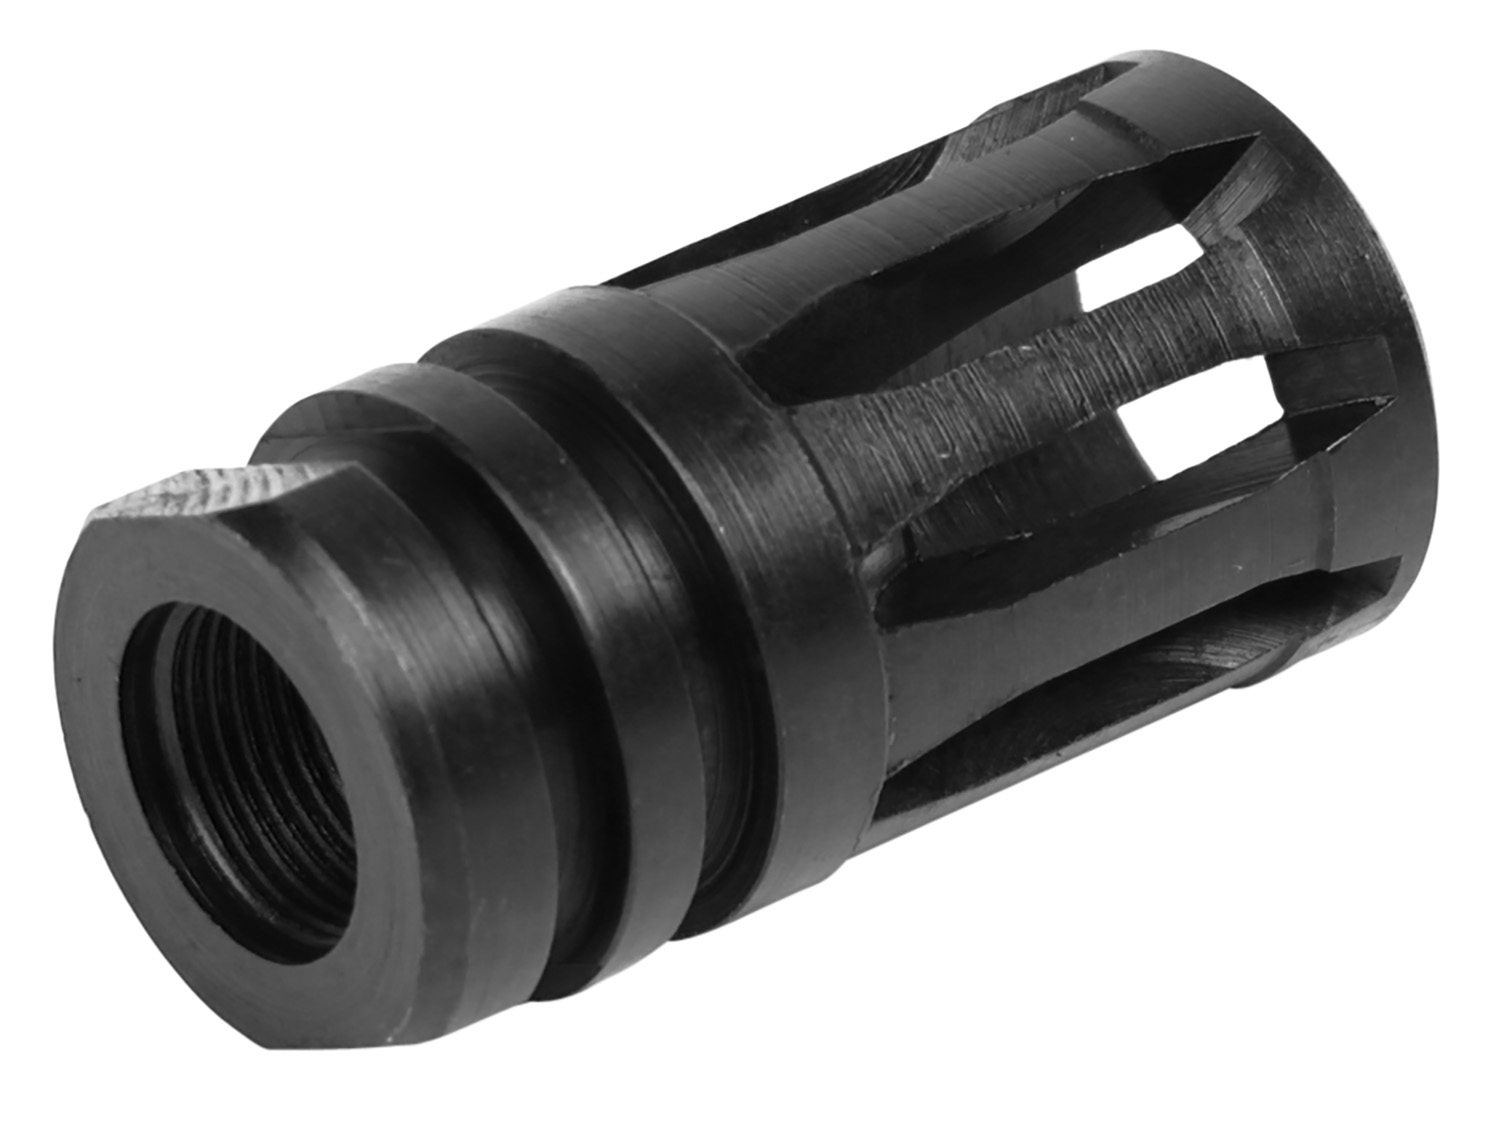 LBE Unlimited ARA2FH A2 Birdcage  Black 4140 Steel for 5.56x45mm NATO AR-15